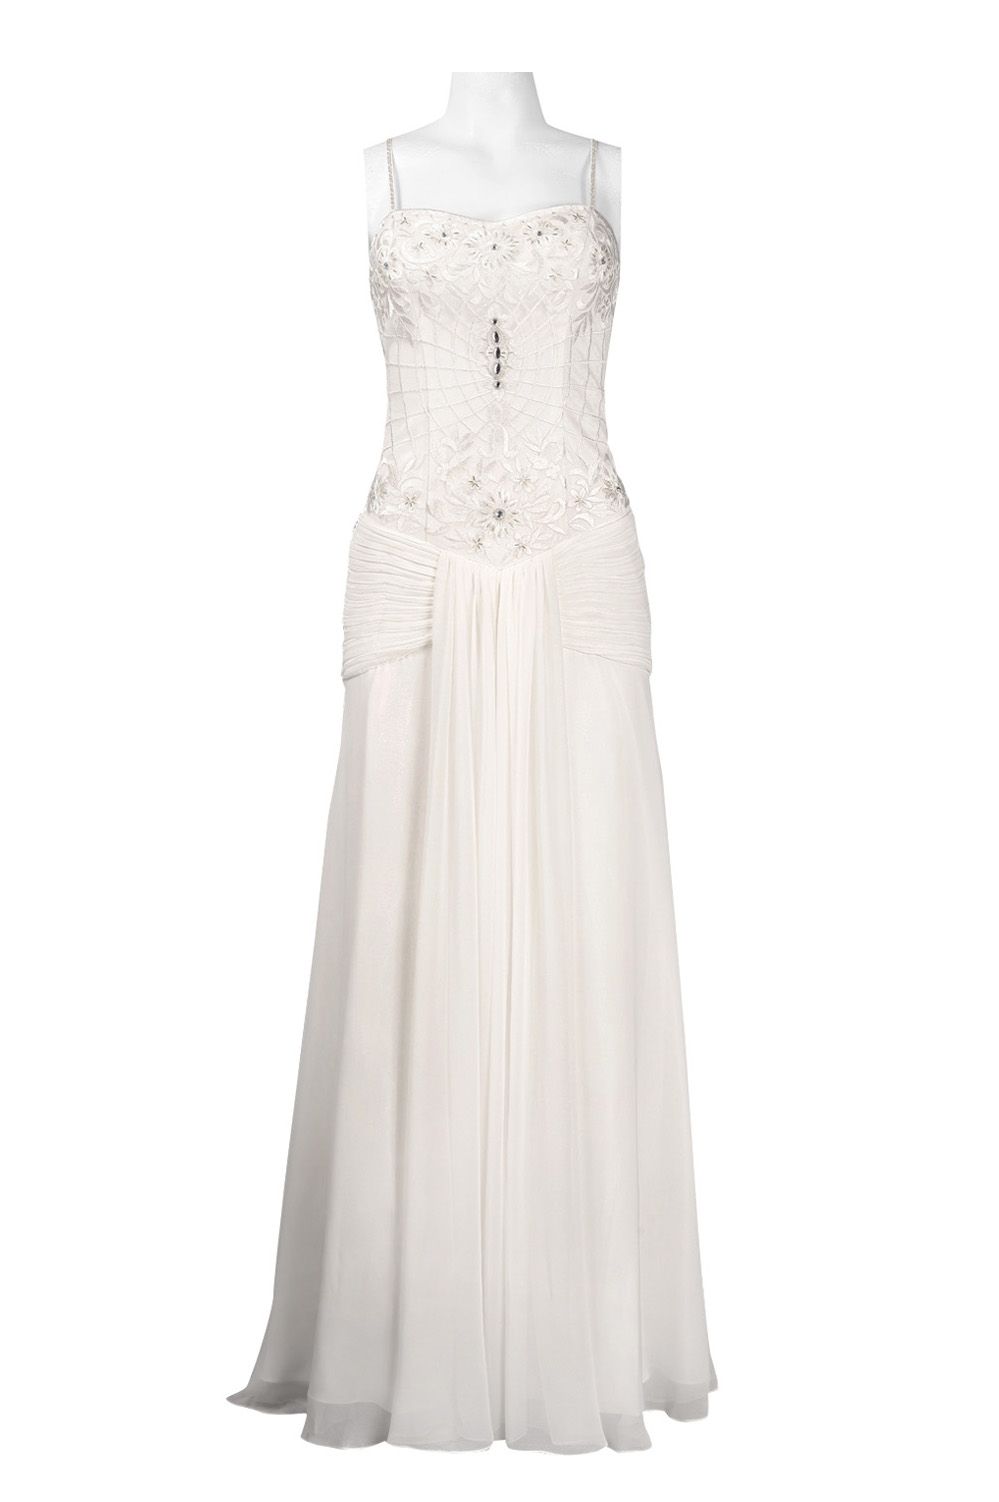 Exquisite White/Ivory Embroidered Chiffon Formal Gown Sizes 4/6/10 Women's Bridal, Party, Weddings